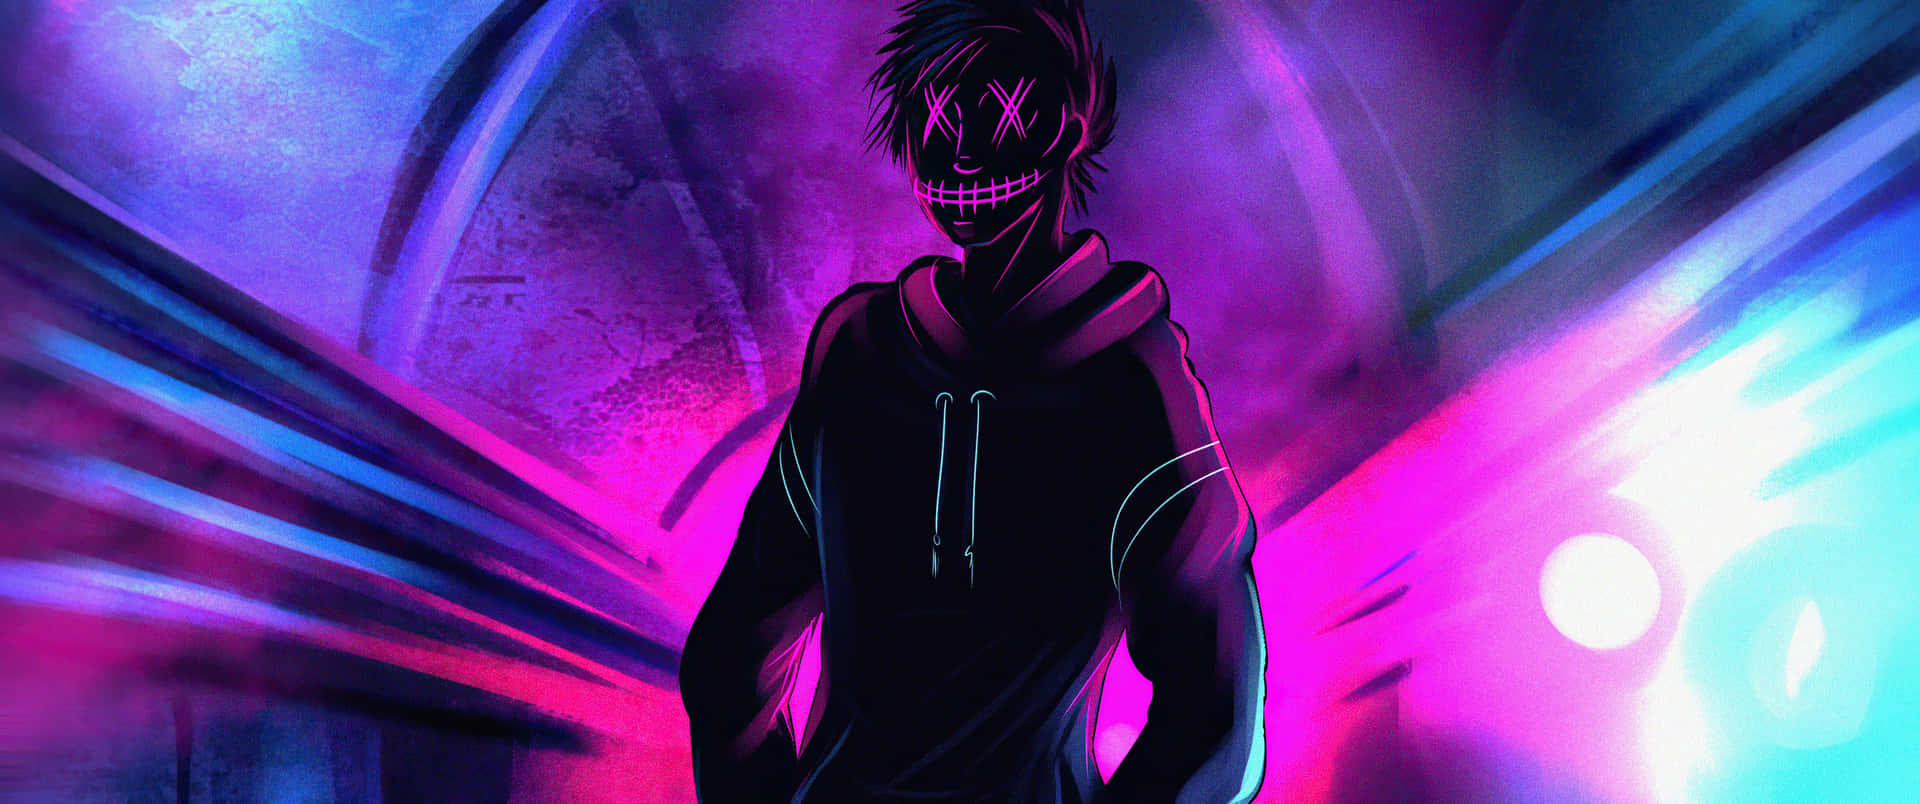 A Man In A Hoodie Standing In Front Of A Purple Light Wallpaper